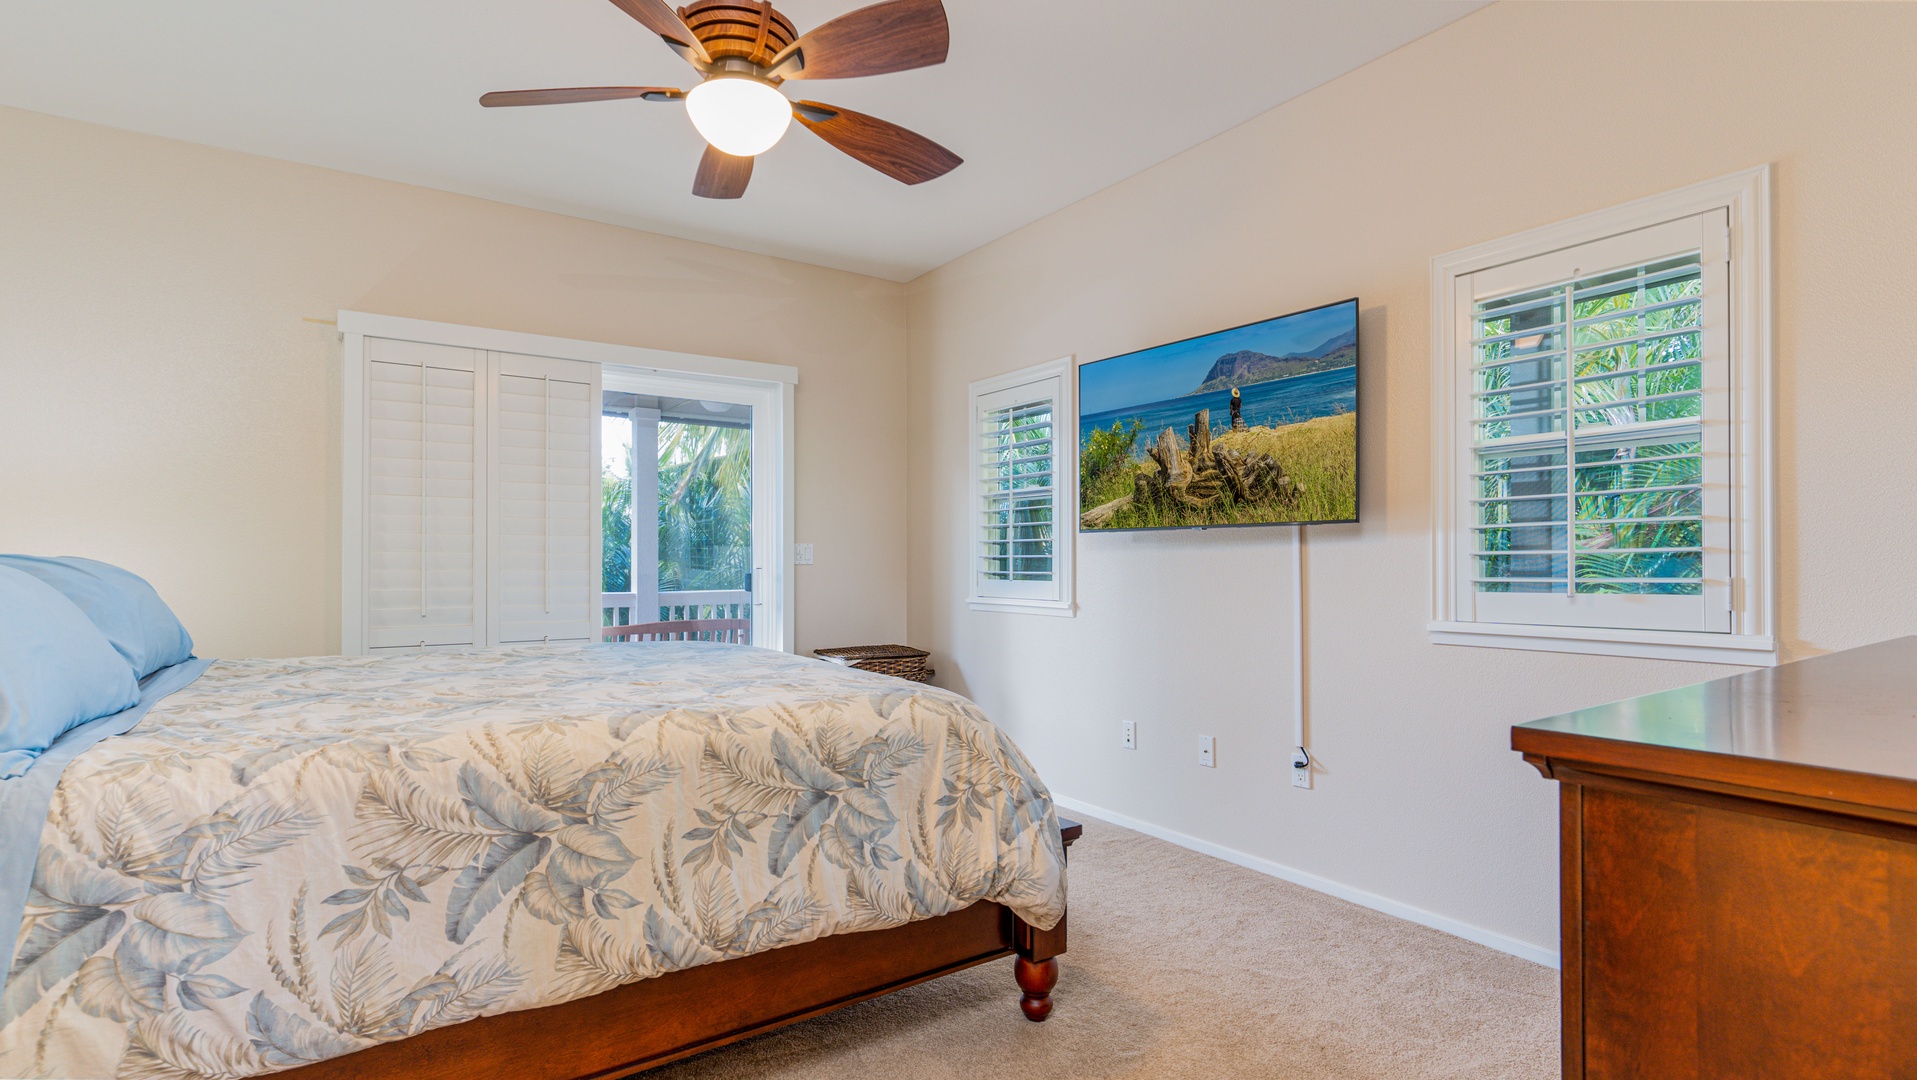 Kapolei Vacation Rentals, Coconut Plantation 1234-2 - The primary guest bedroom with TV and access to the upstairs lanai.